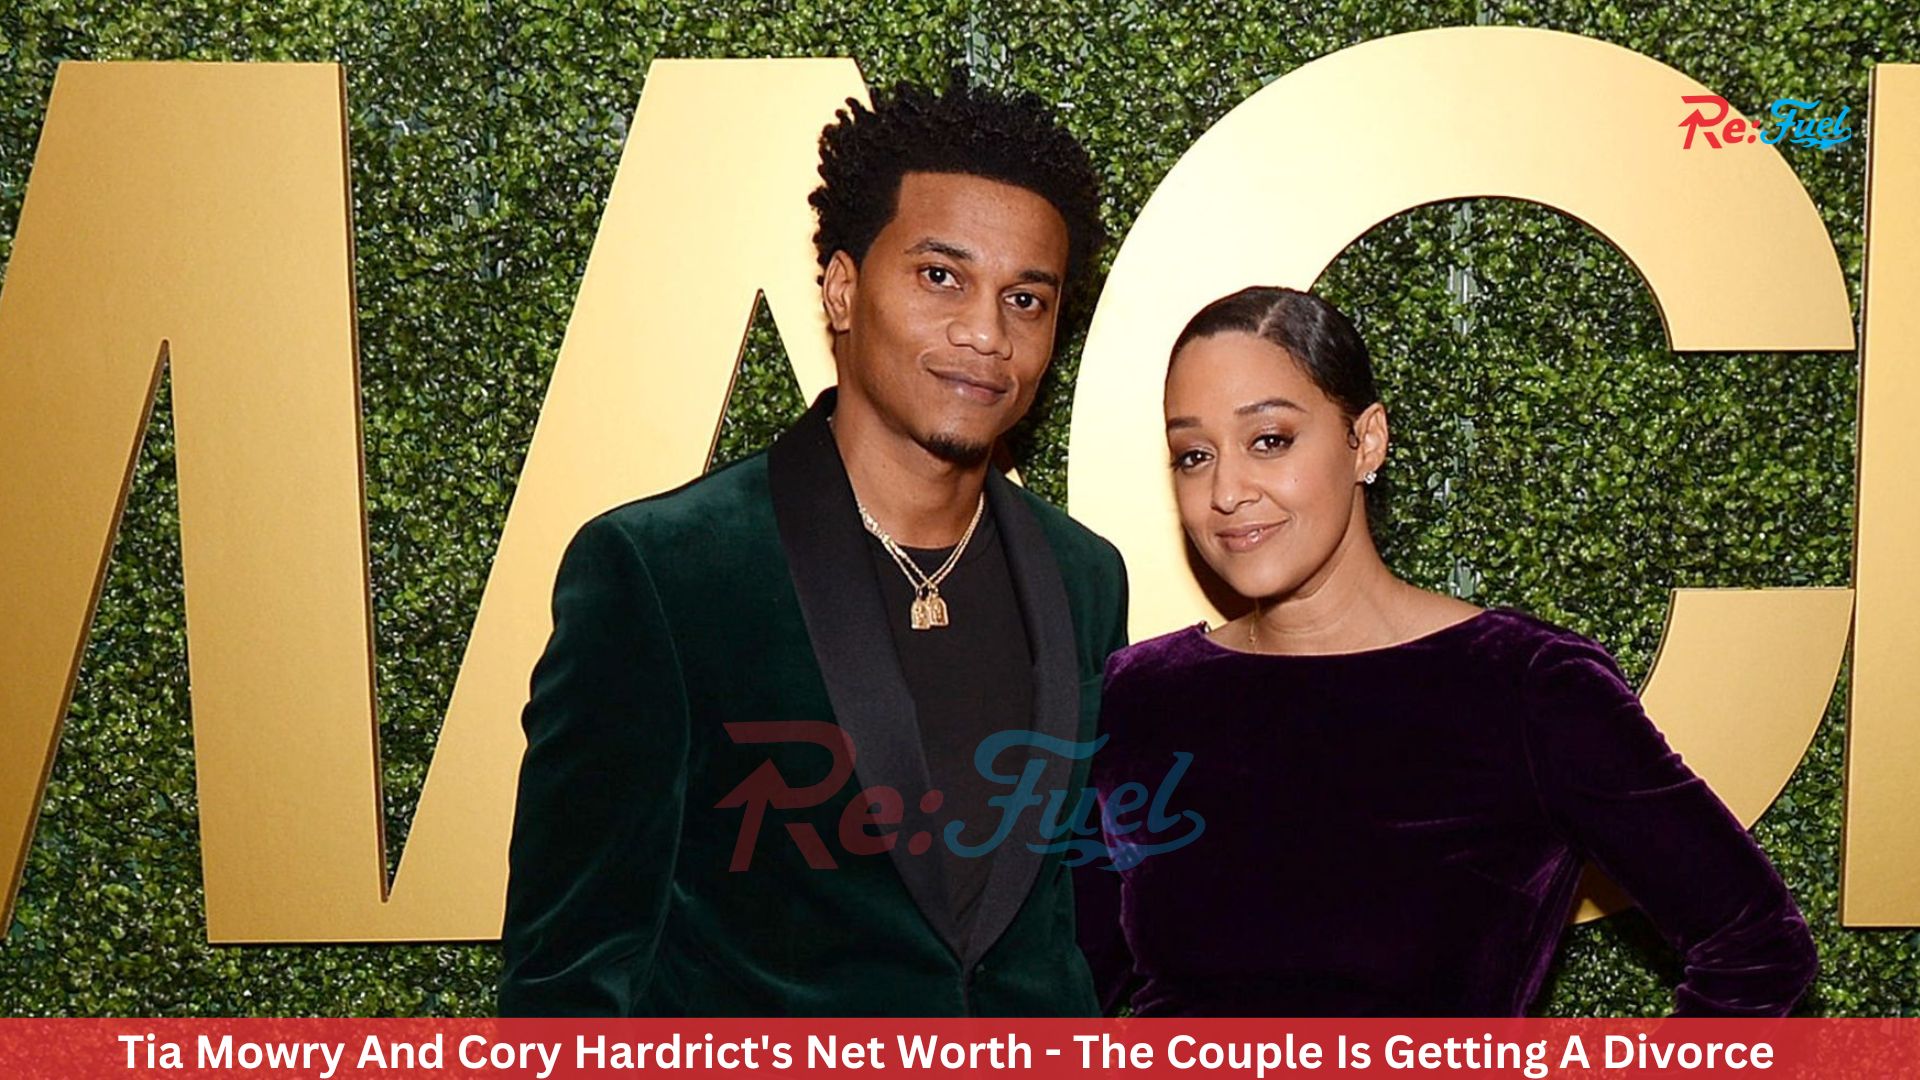 Tia Mowry And Cory Hardrict's Net Worth - The Couple Is Getting A Divorce